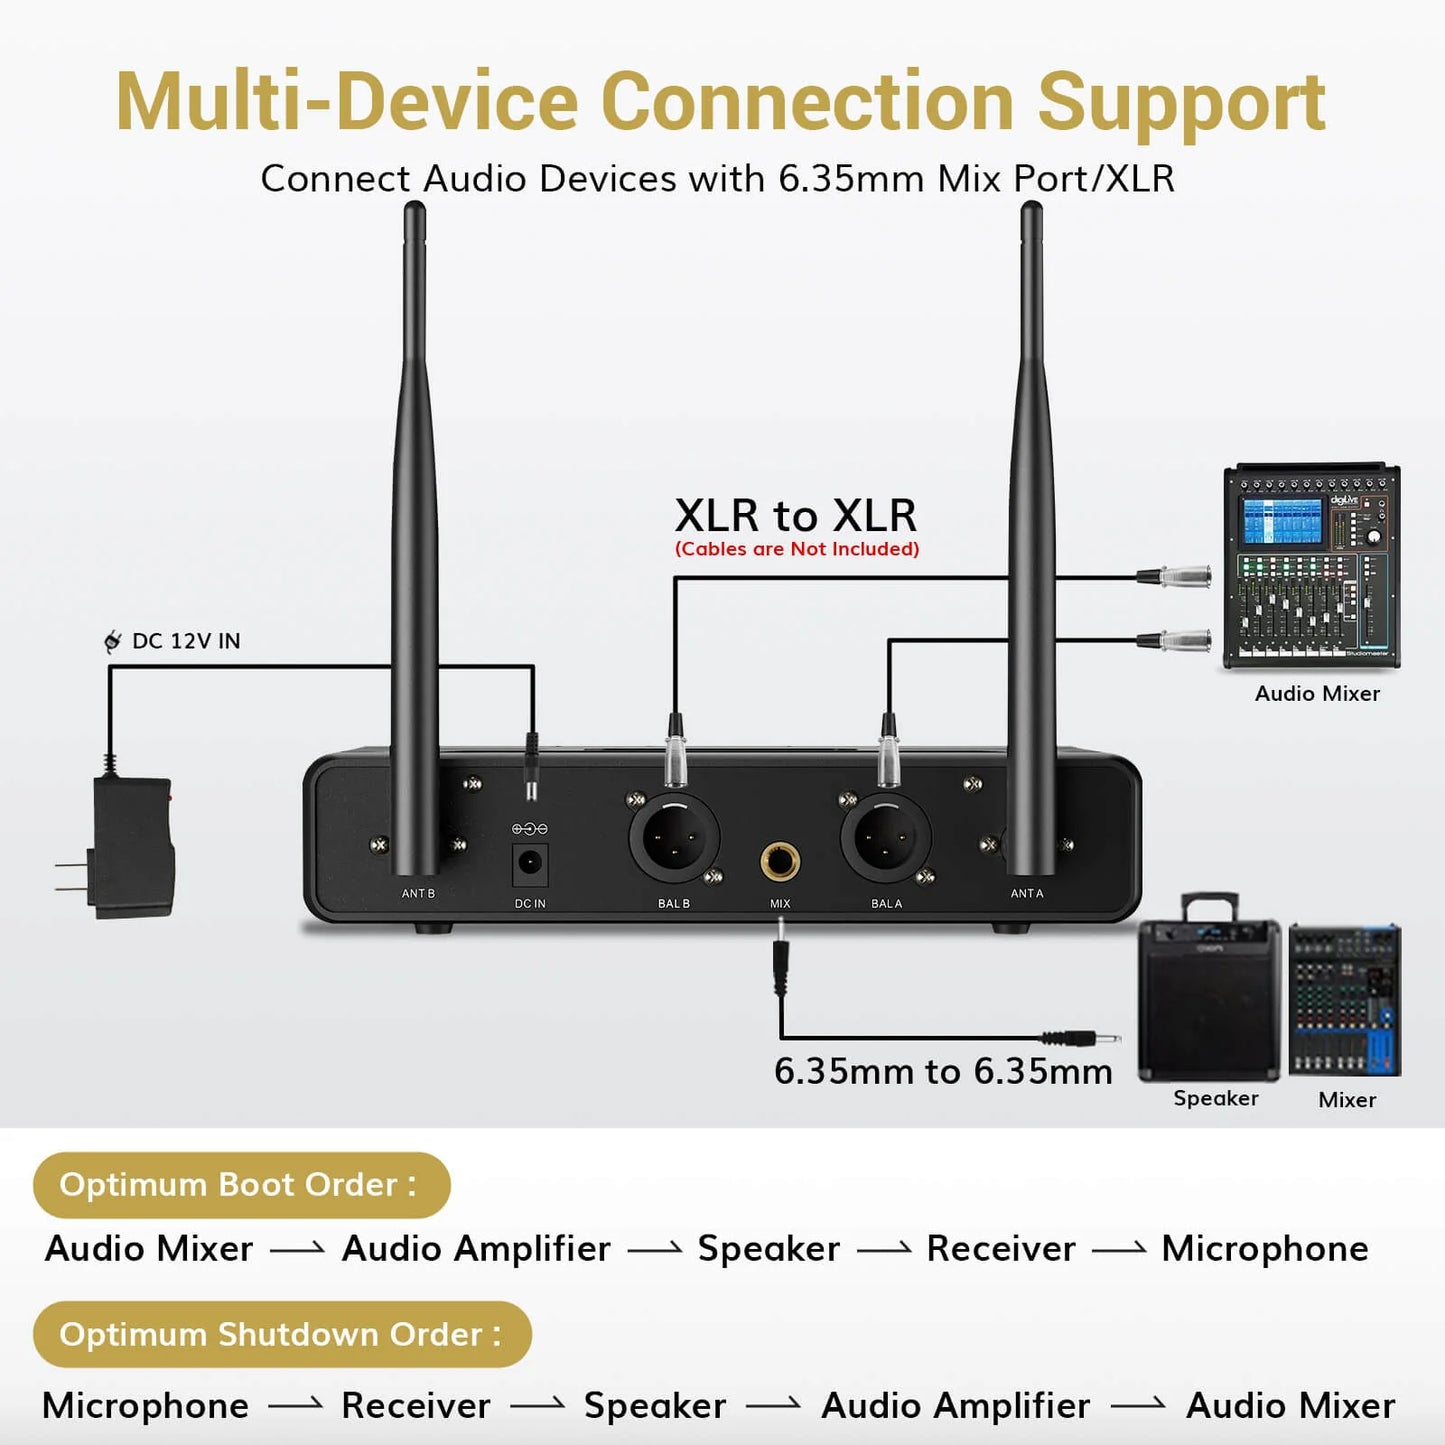 TONOR TW-350 wireless microphone system (two sets)